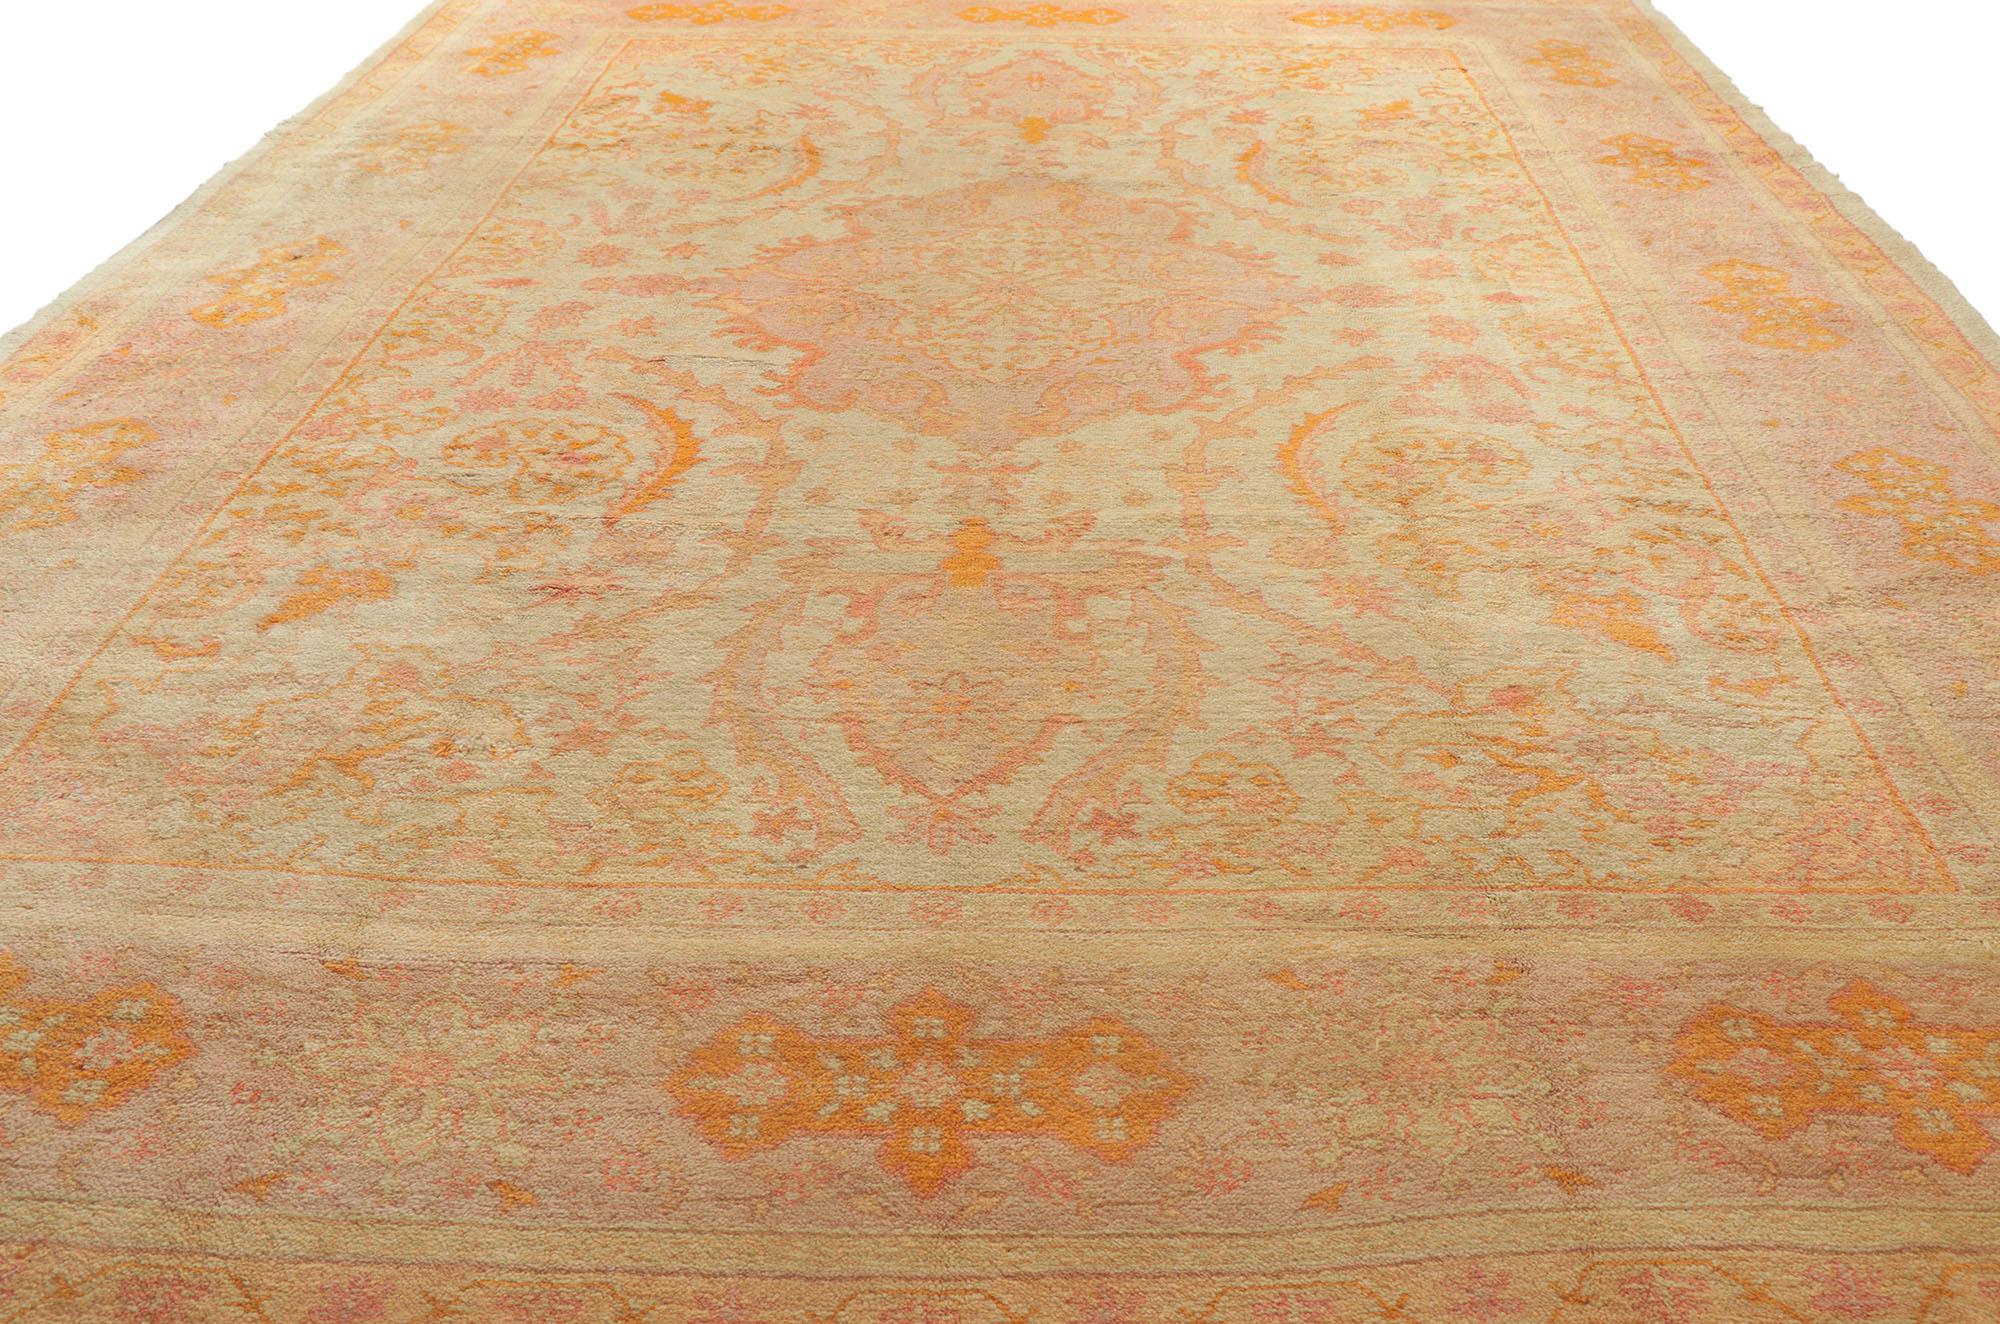 Late 19th Century Antique Turkish Oushak Rug with Soft Colors In Good Condition For Sale In Dallas, TX